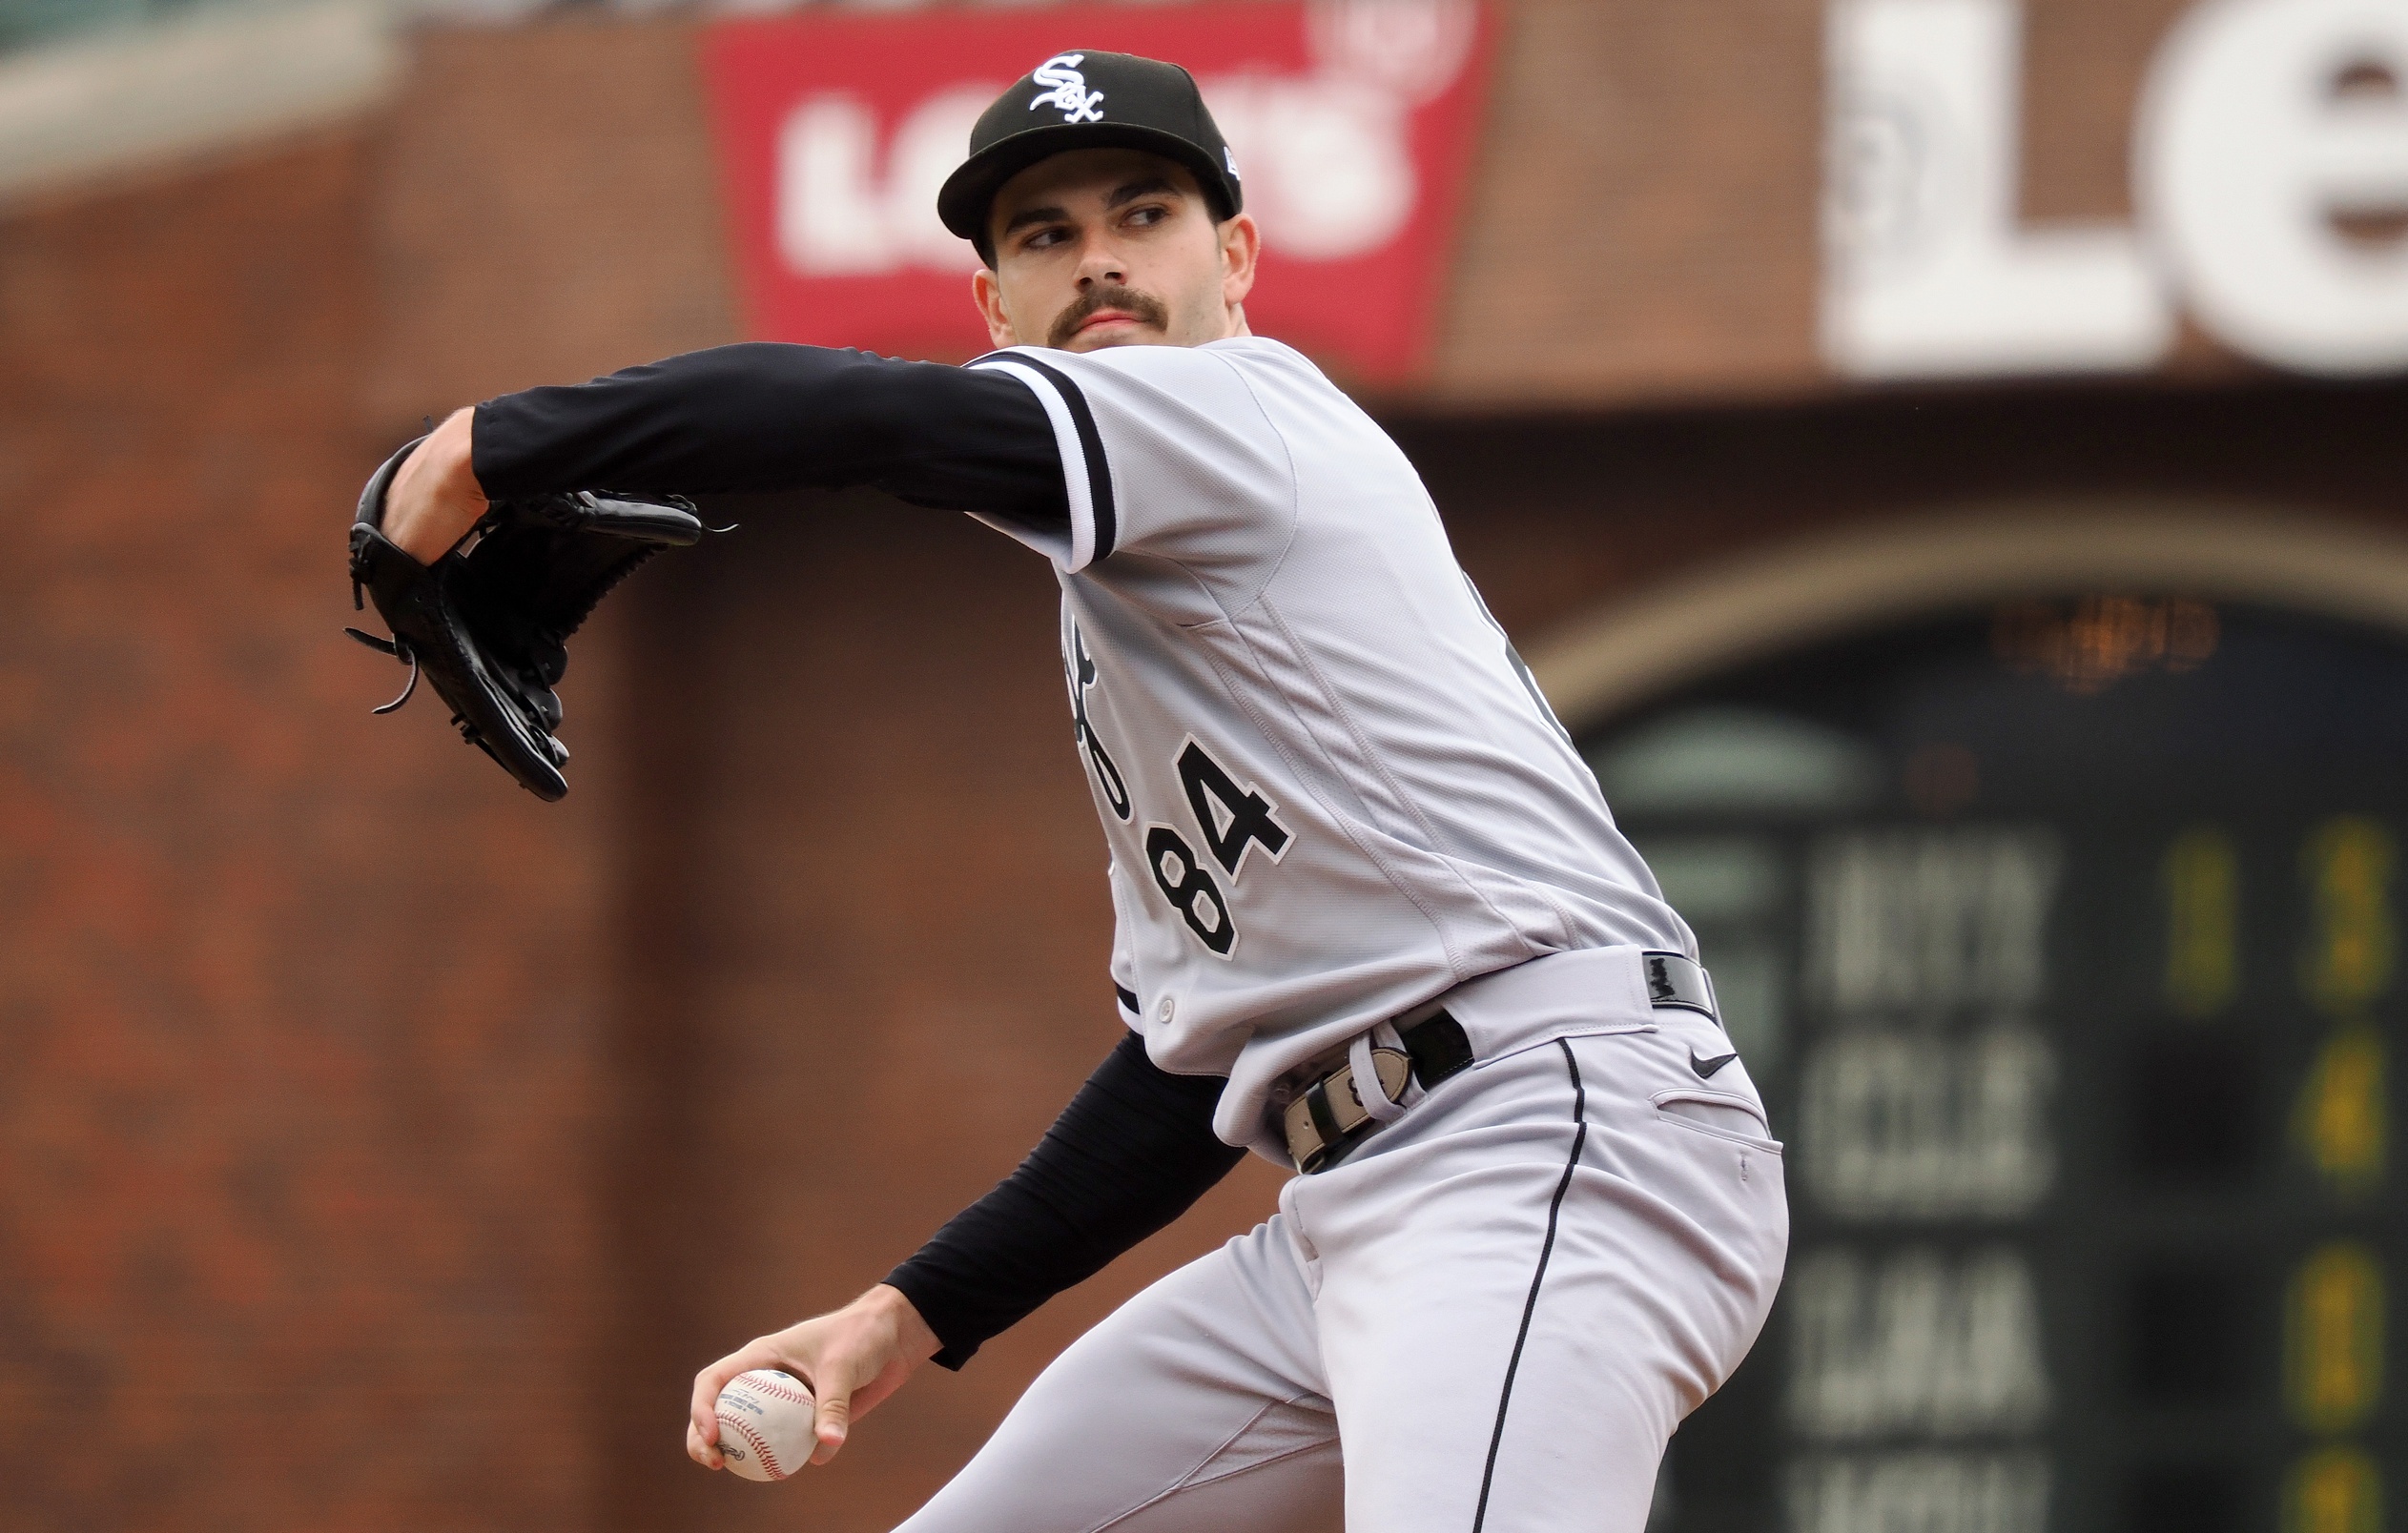 Jul 2, 2022; San Francisco, California, USA; Chicago White Sox starting pitcher Dylan Cease (84) pitches the ball against the San Francisco Giants during the first inning at Oracle Park. Mandatory Credit: Kelley L Cox-USA TODAY Sports